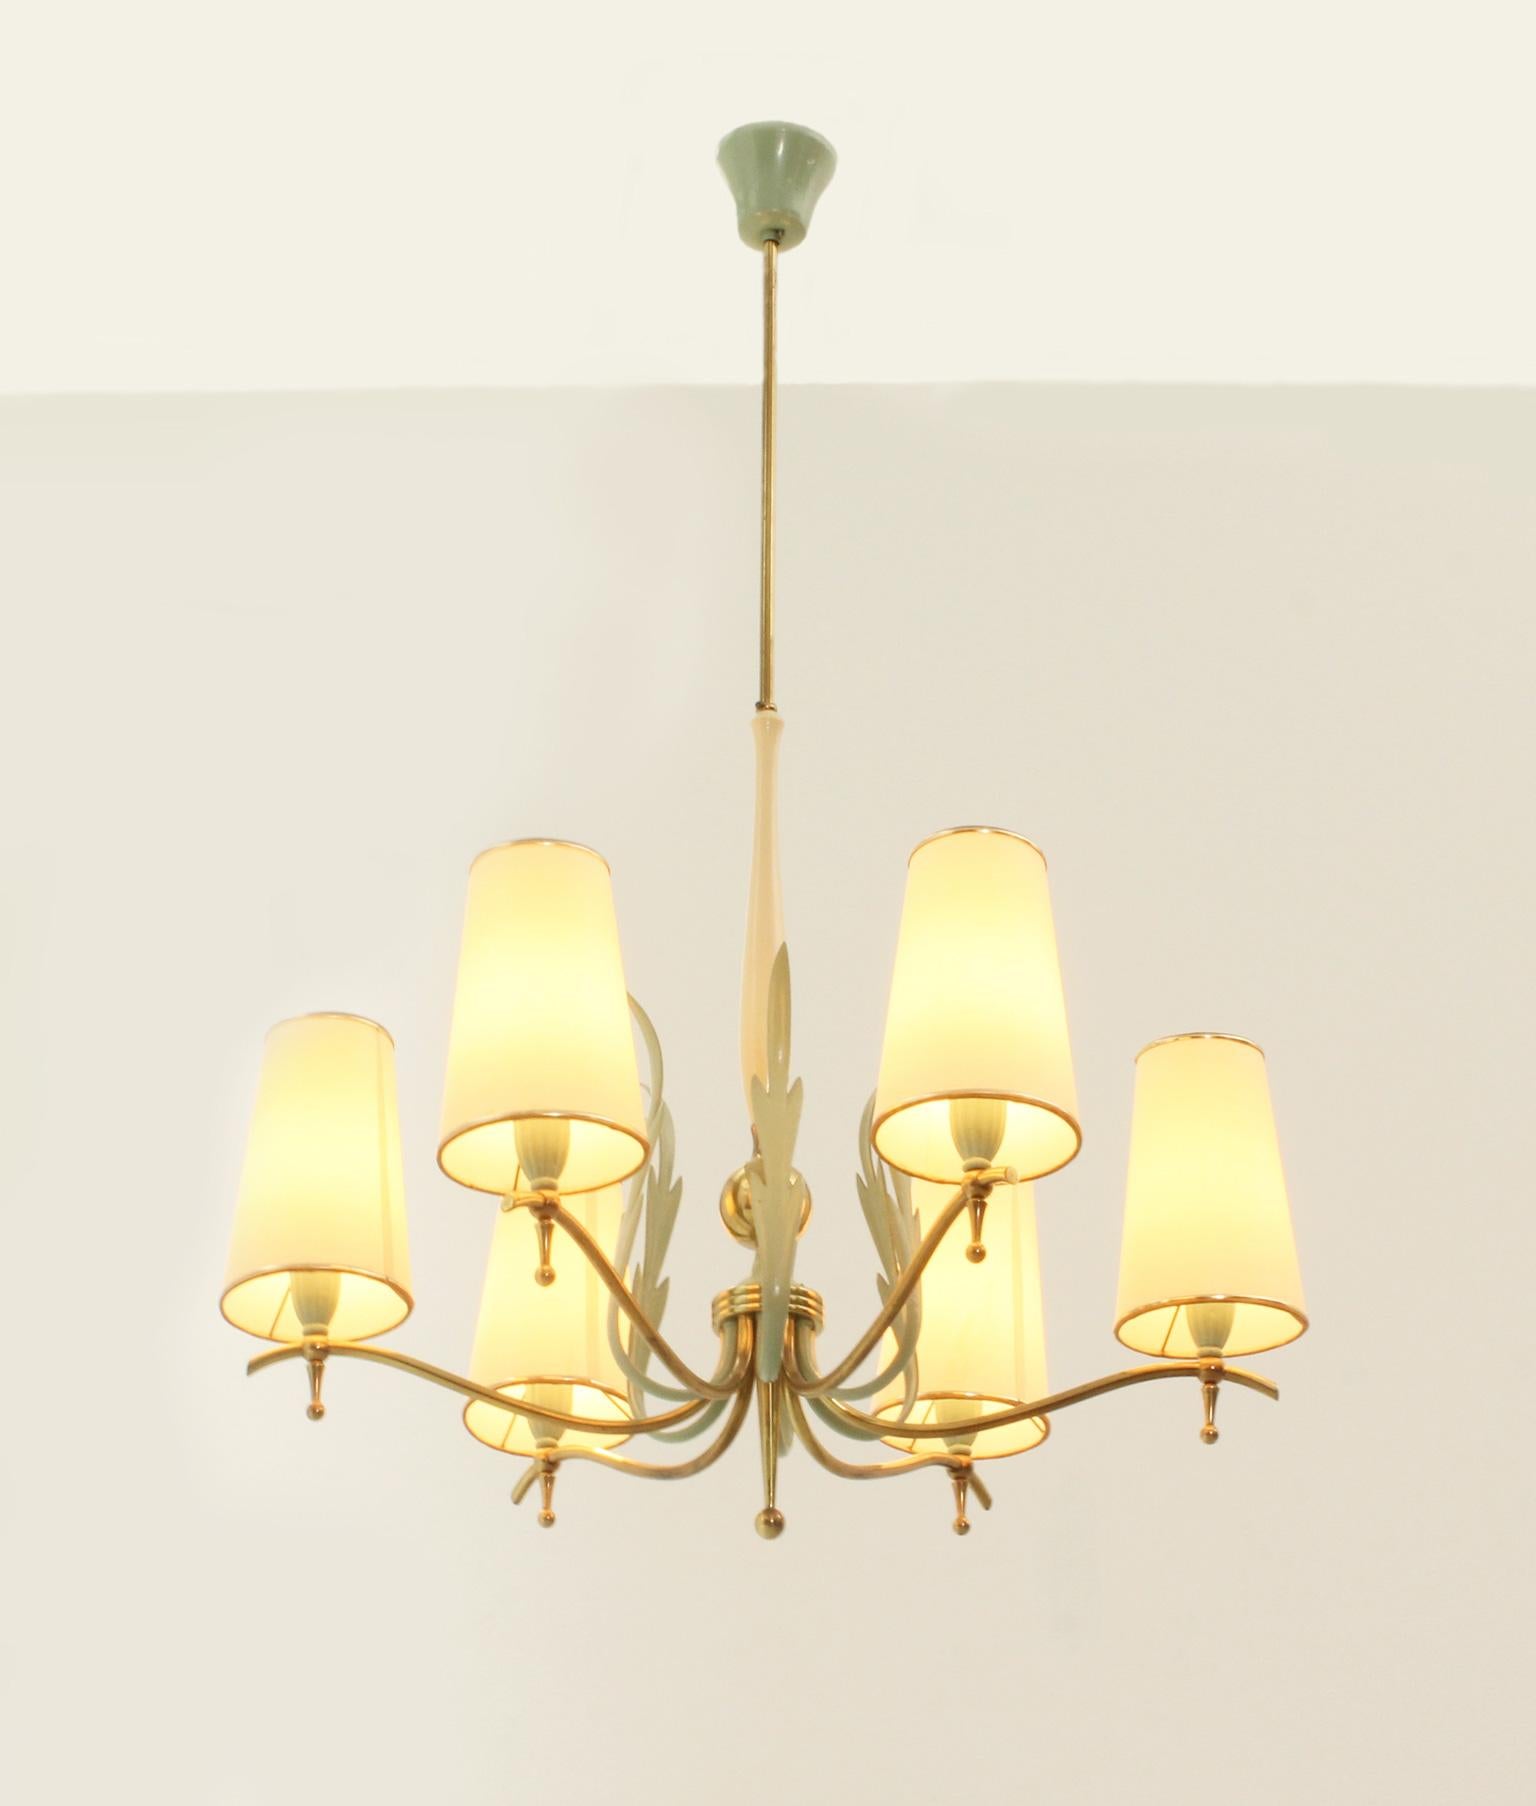 Pendant lamp with six arms produced by Stilnovo, Italy, 1940's. Documented. Brass and lacquered metal and wood. The shades have been renovated some years ago.